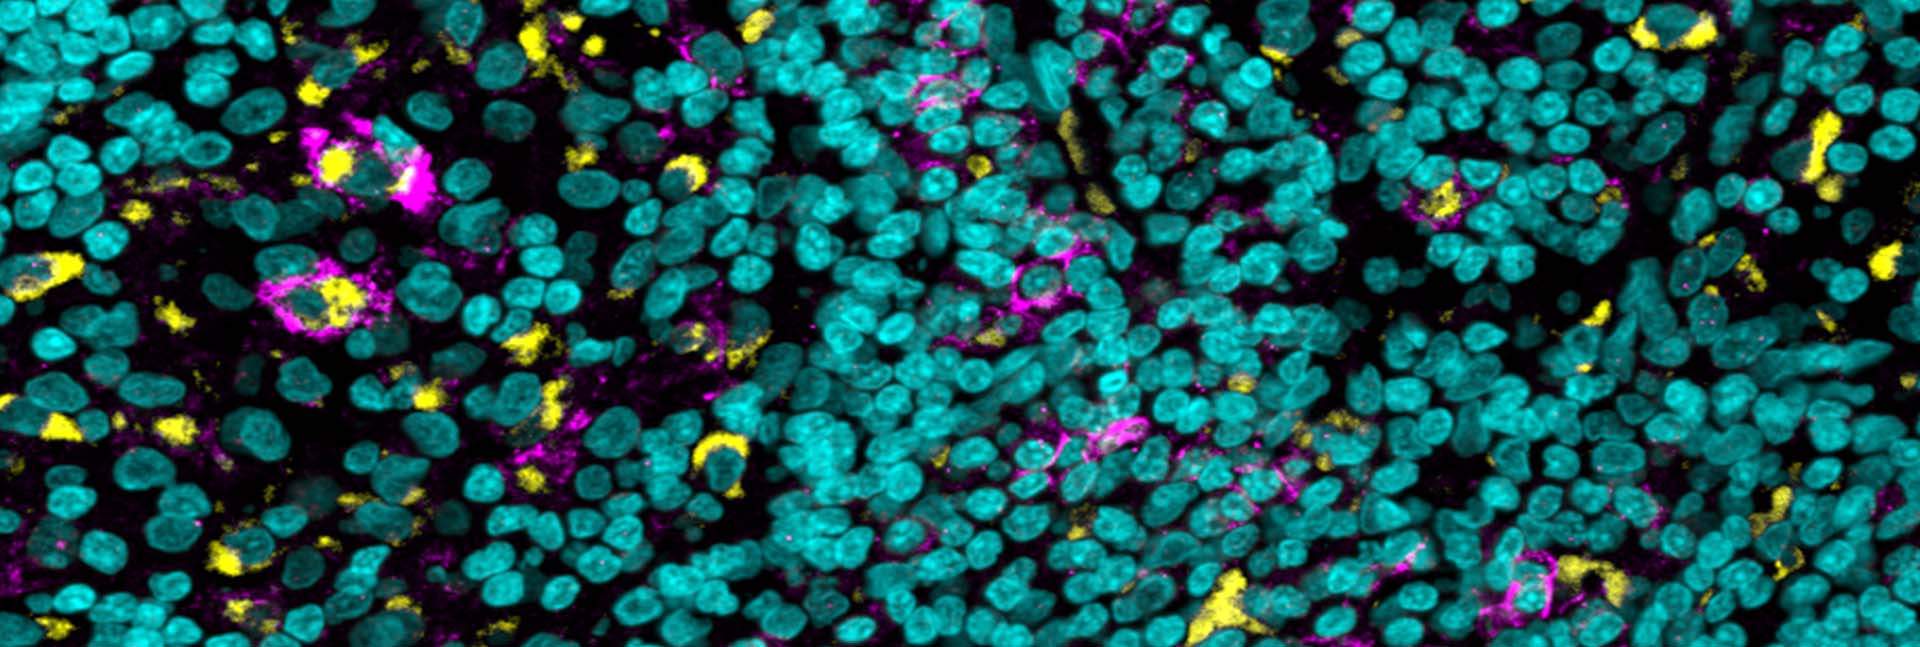 Tissue sample of a particularly aggressive skin cancer reveals immune cells (yellow) that express on their surfaces a “brake pedal” receptor called FcgIIb (purple); cell nuclei are in blue